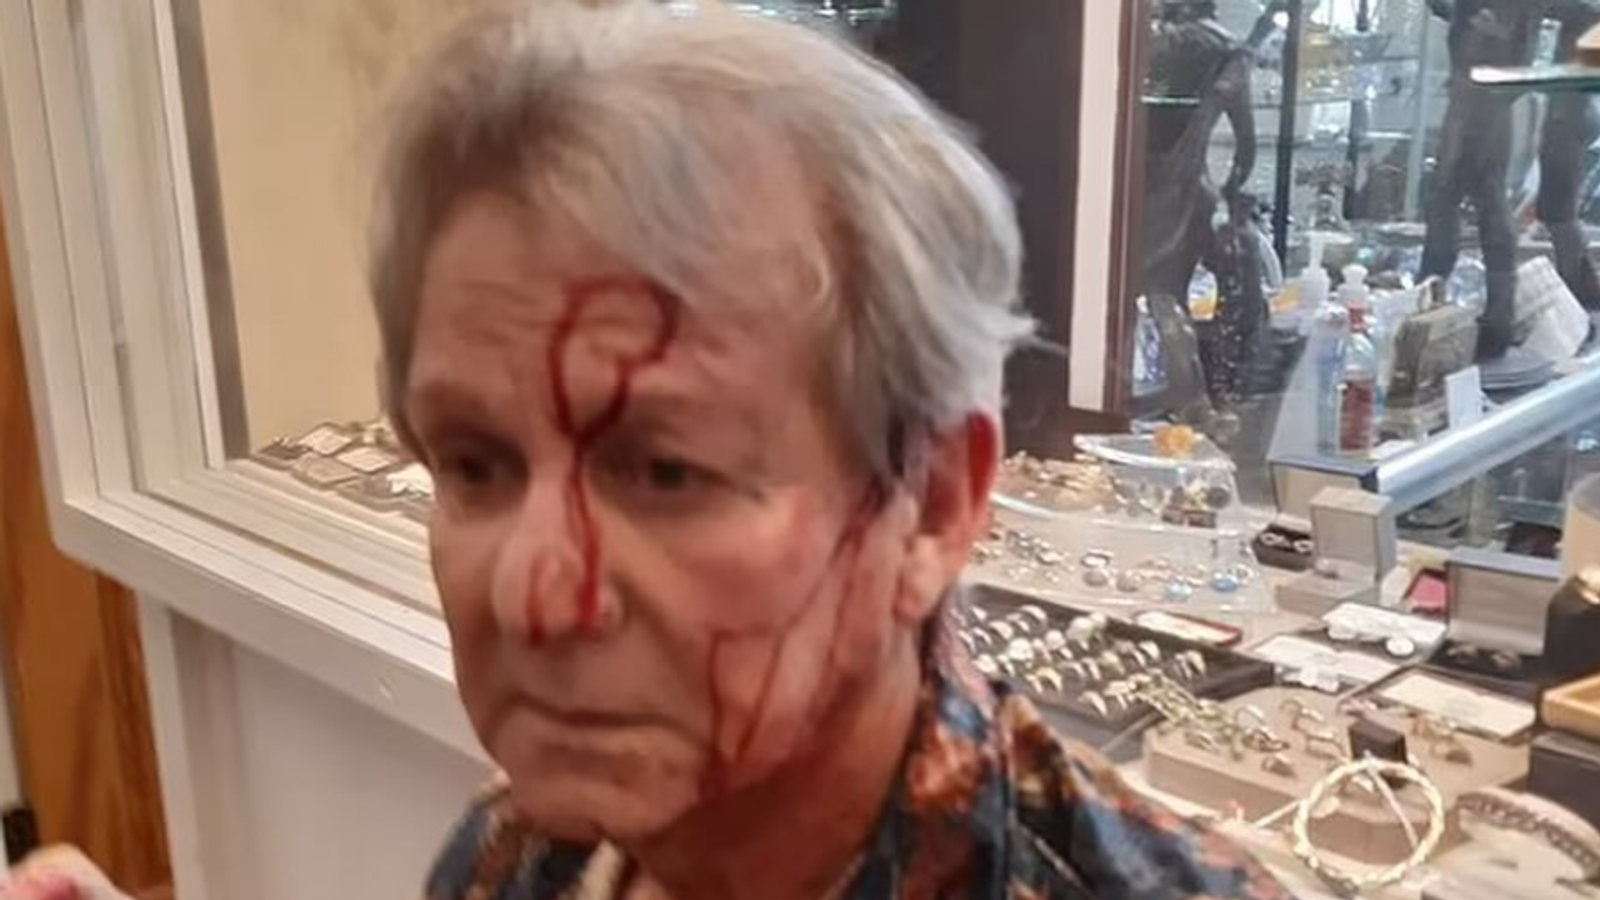 Celebrity antiques expert Ian Towning reveals injuries after hammer attack during robbery